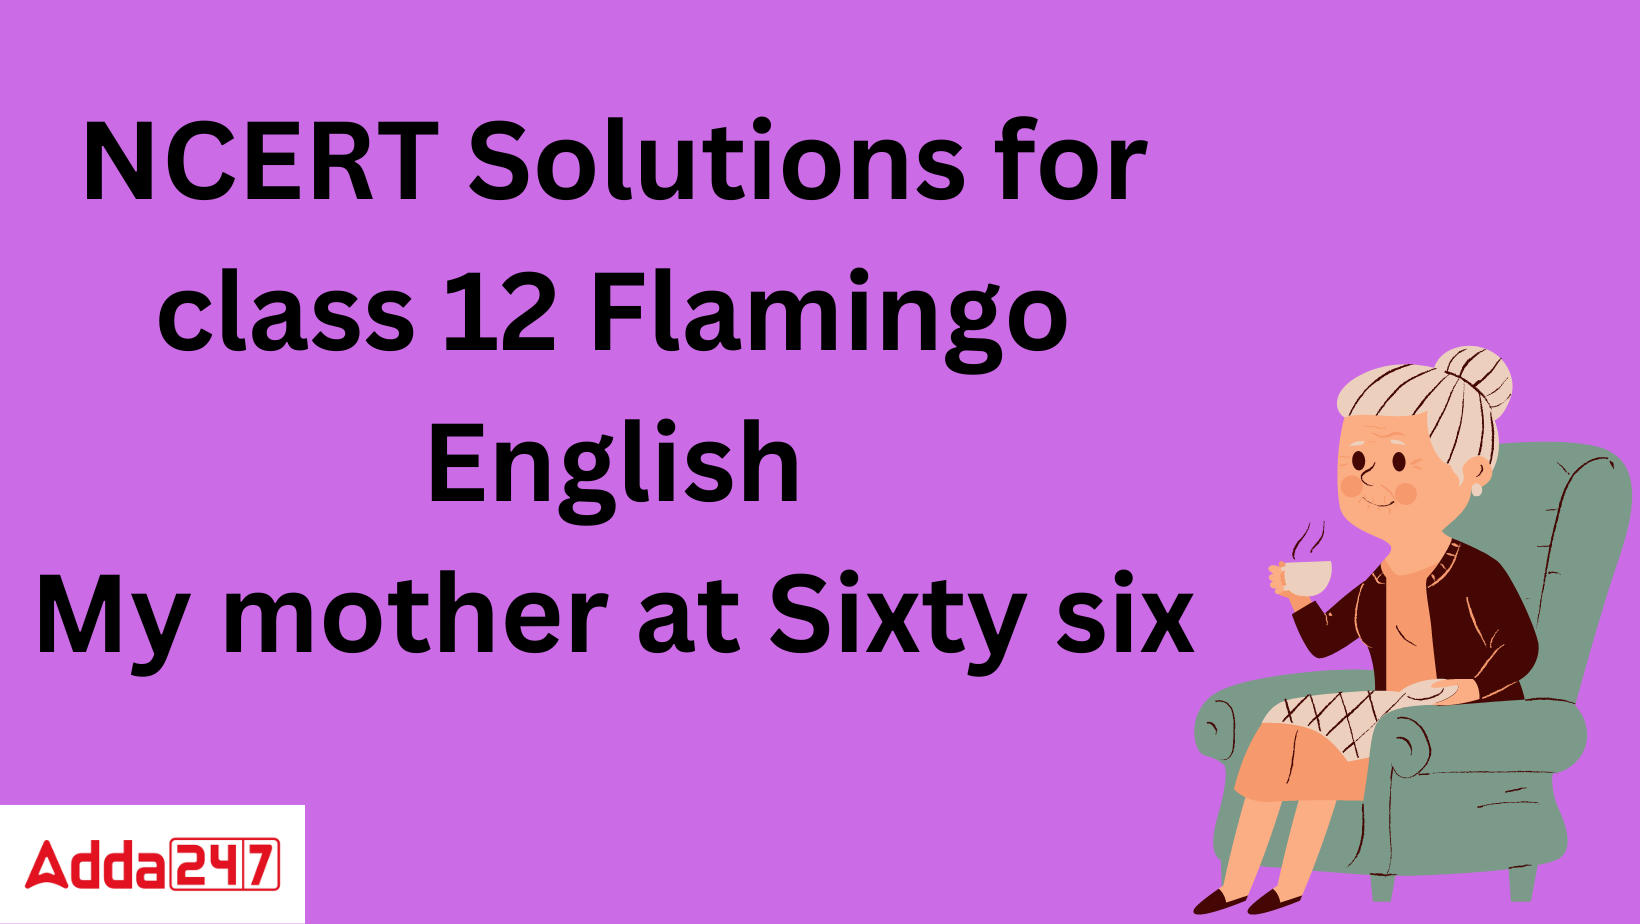 NCERT Solutions for class 12 Flamingo English My mother at Sixty six